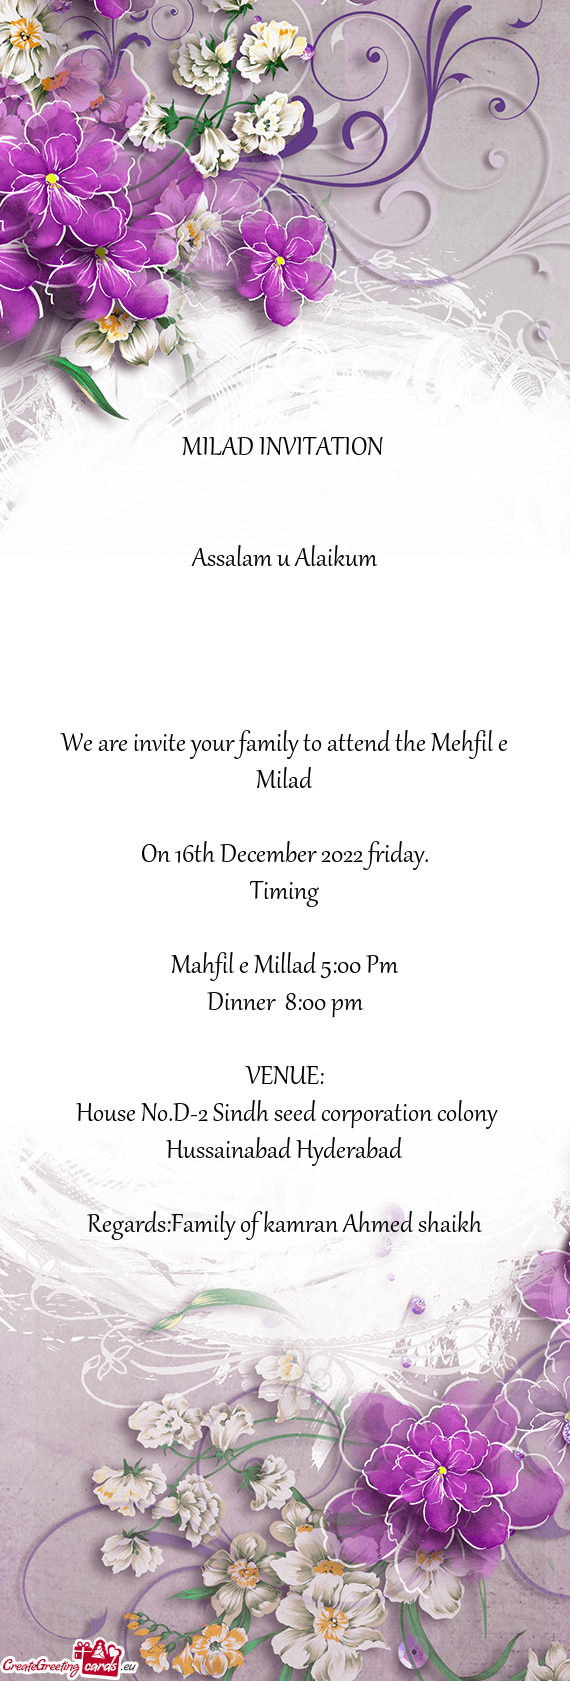 We are invite your family to attend the Mehfil e Milad